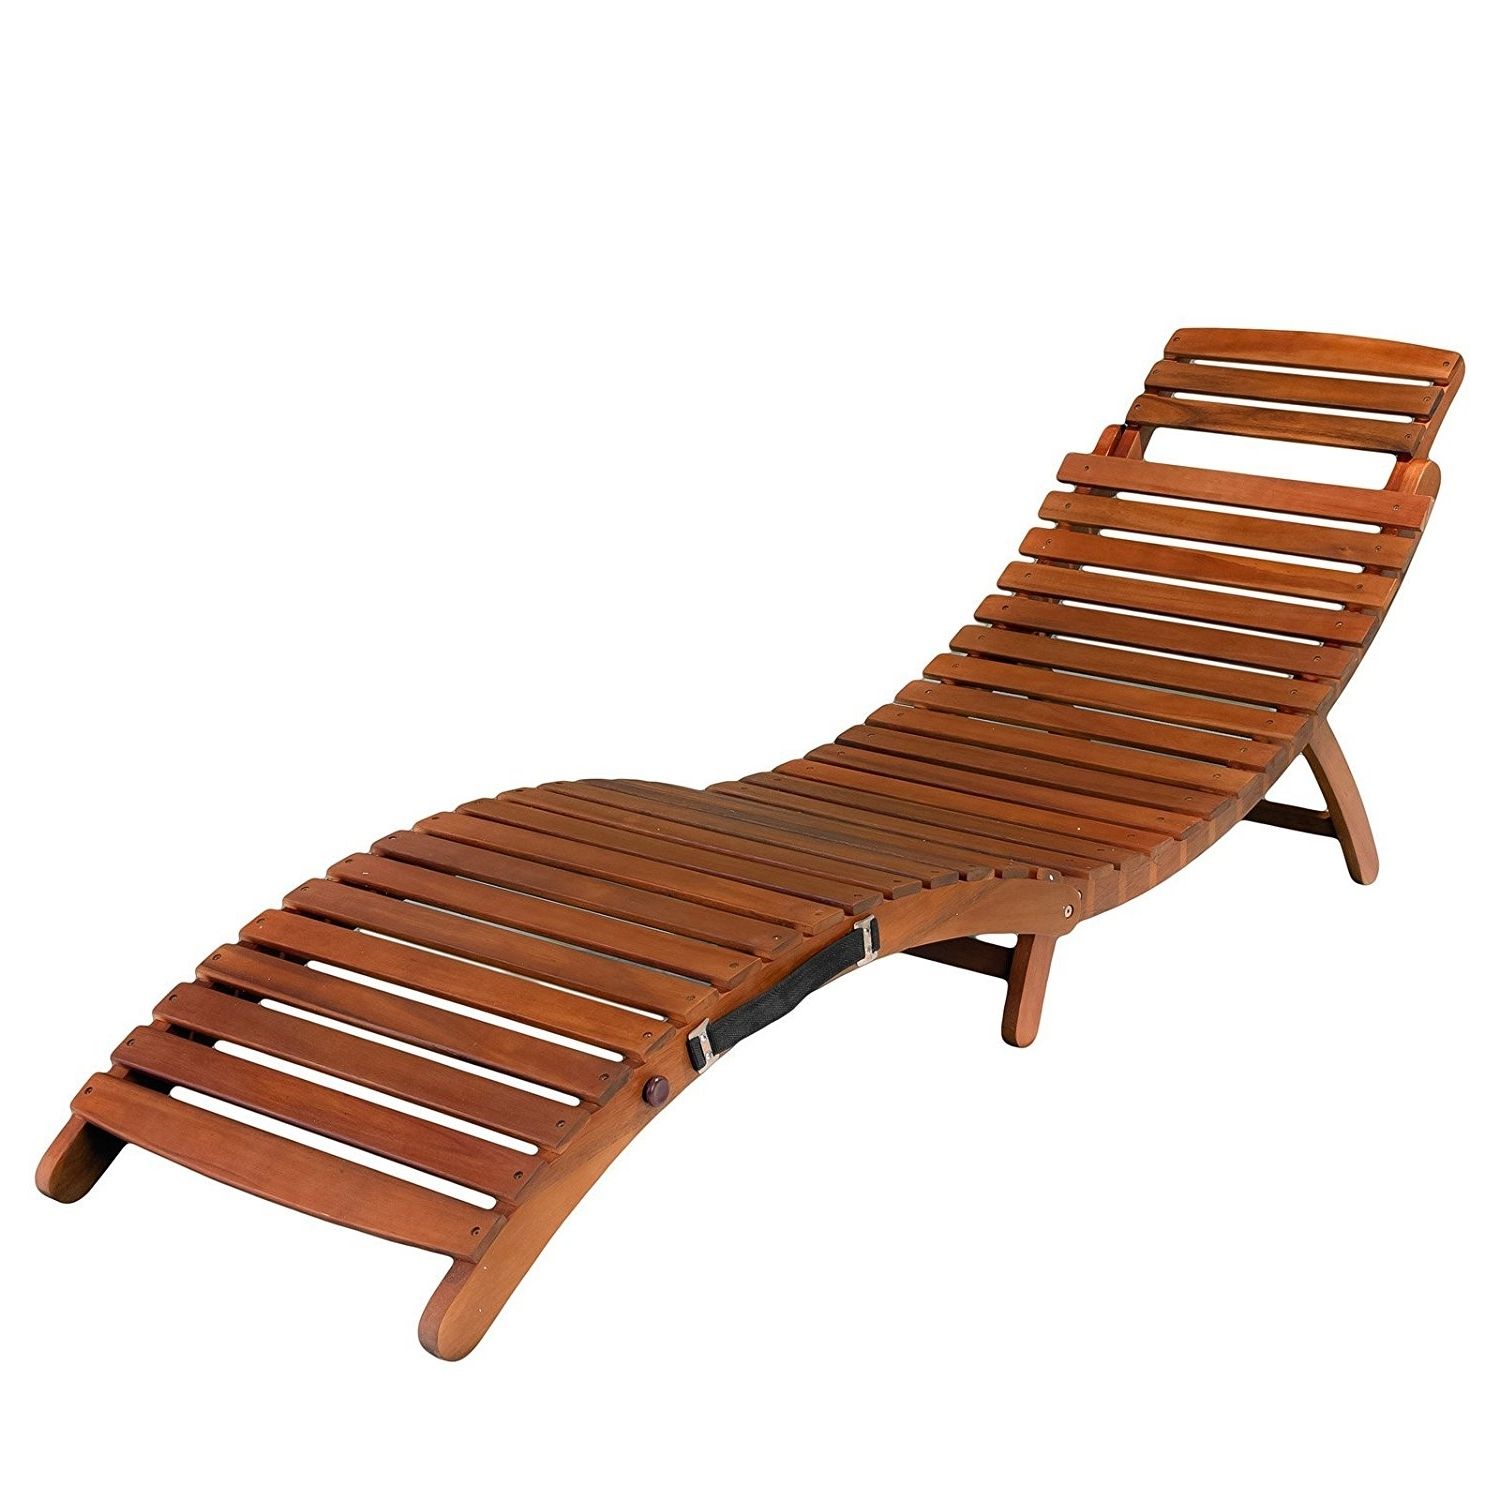 Amazon: Lahaina Outdoor Chaise Lounge: Garden & Outdoor Regarding Well Known Outdoor Chaise Lounge Chairs (View 3 of 15)